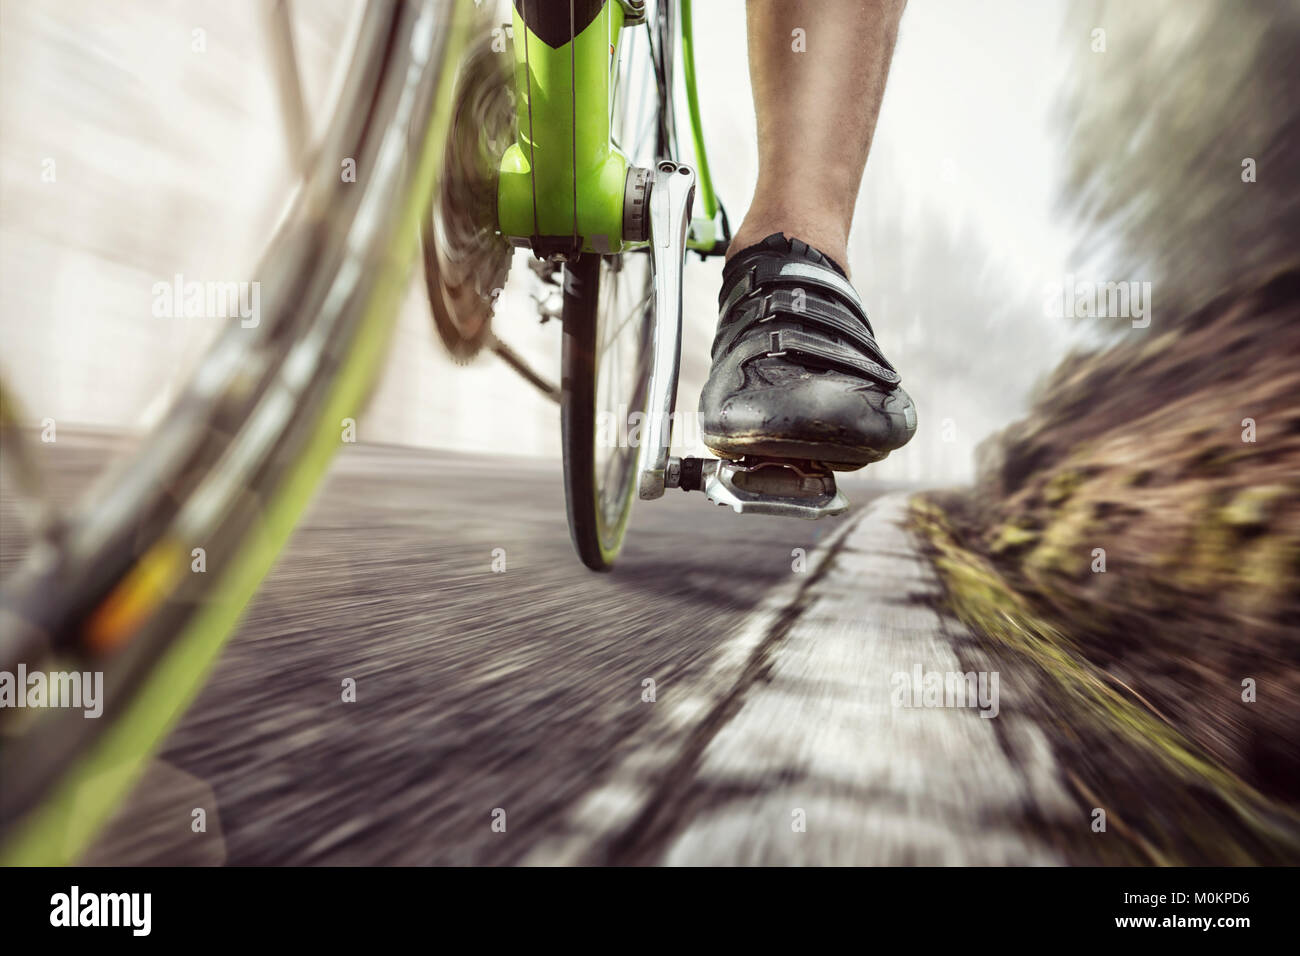 Pedal of a fast moving racing bicycle Stock Photo